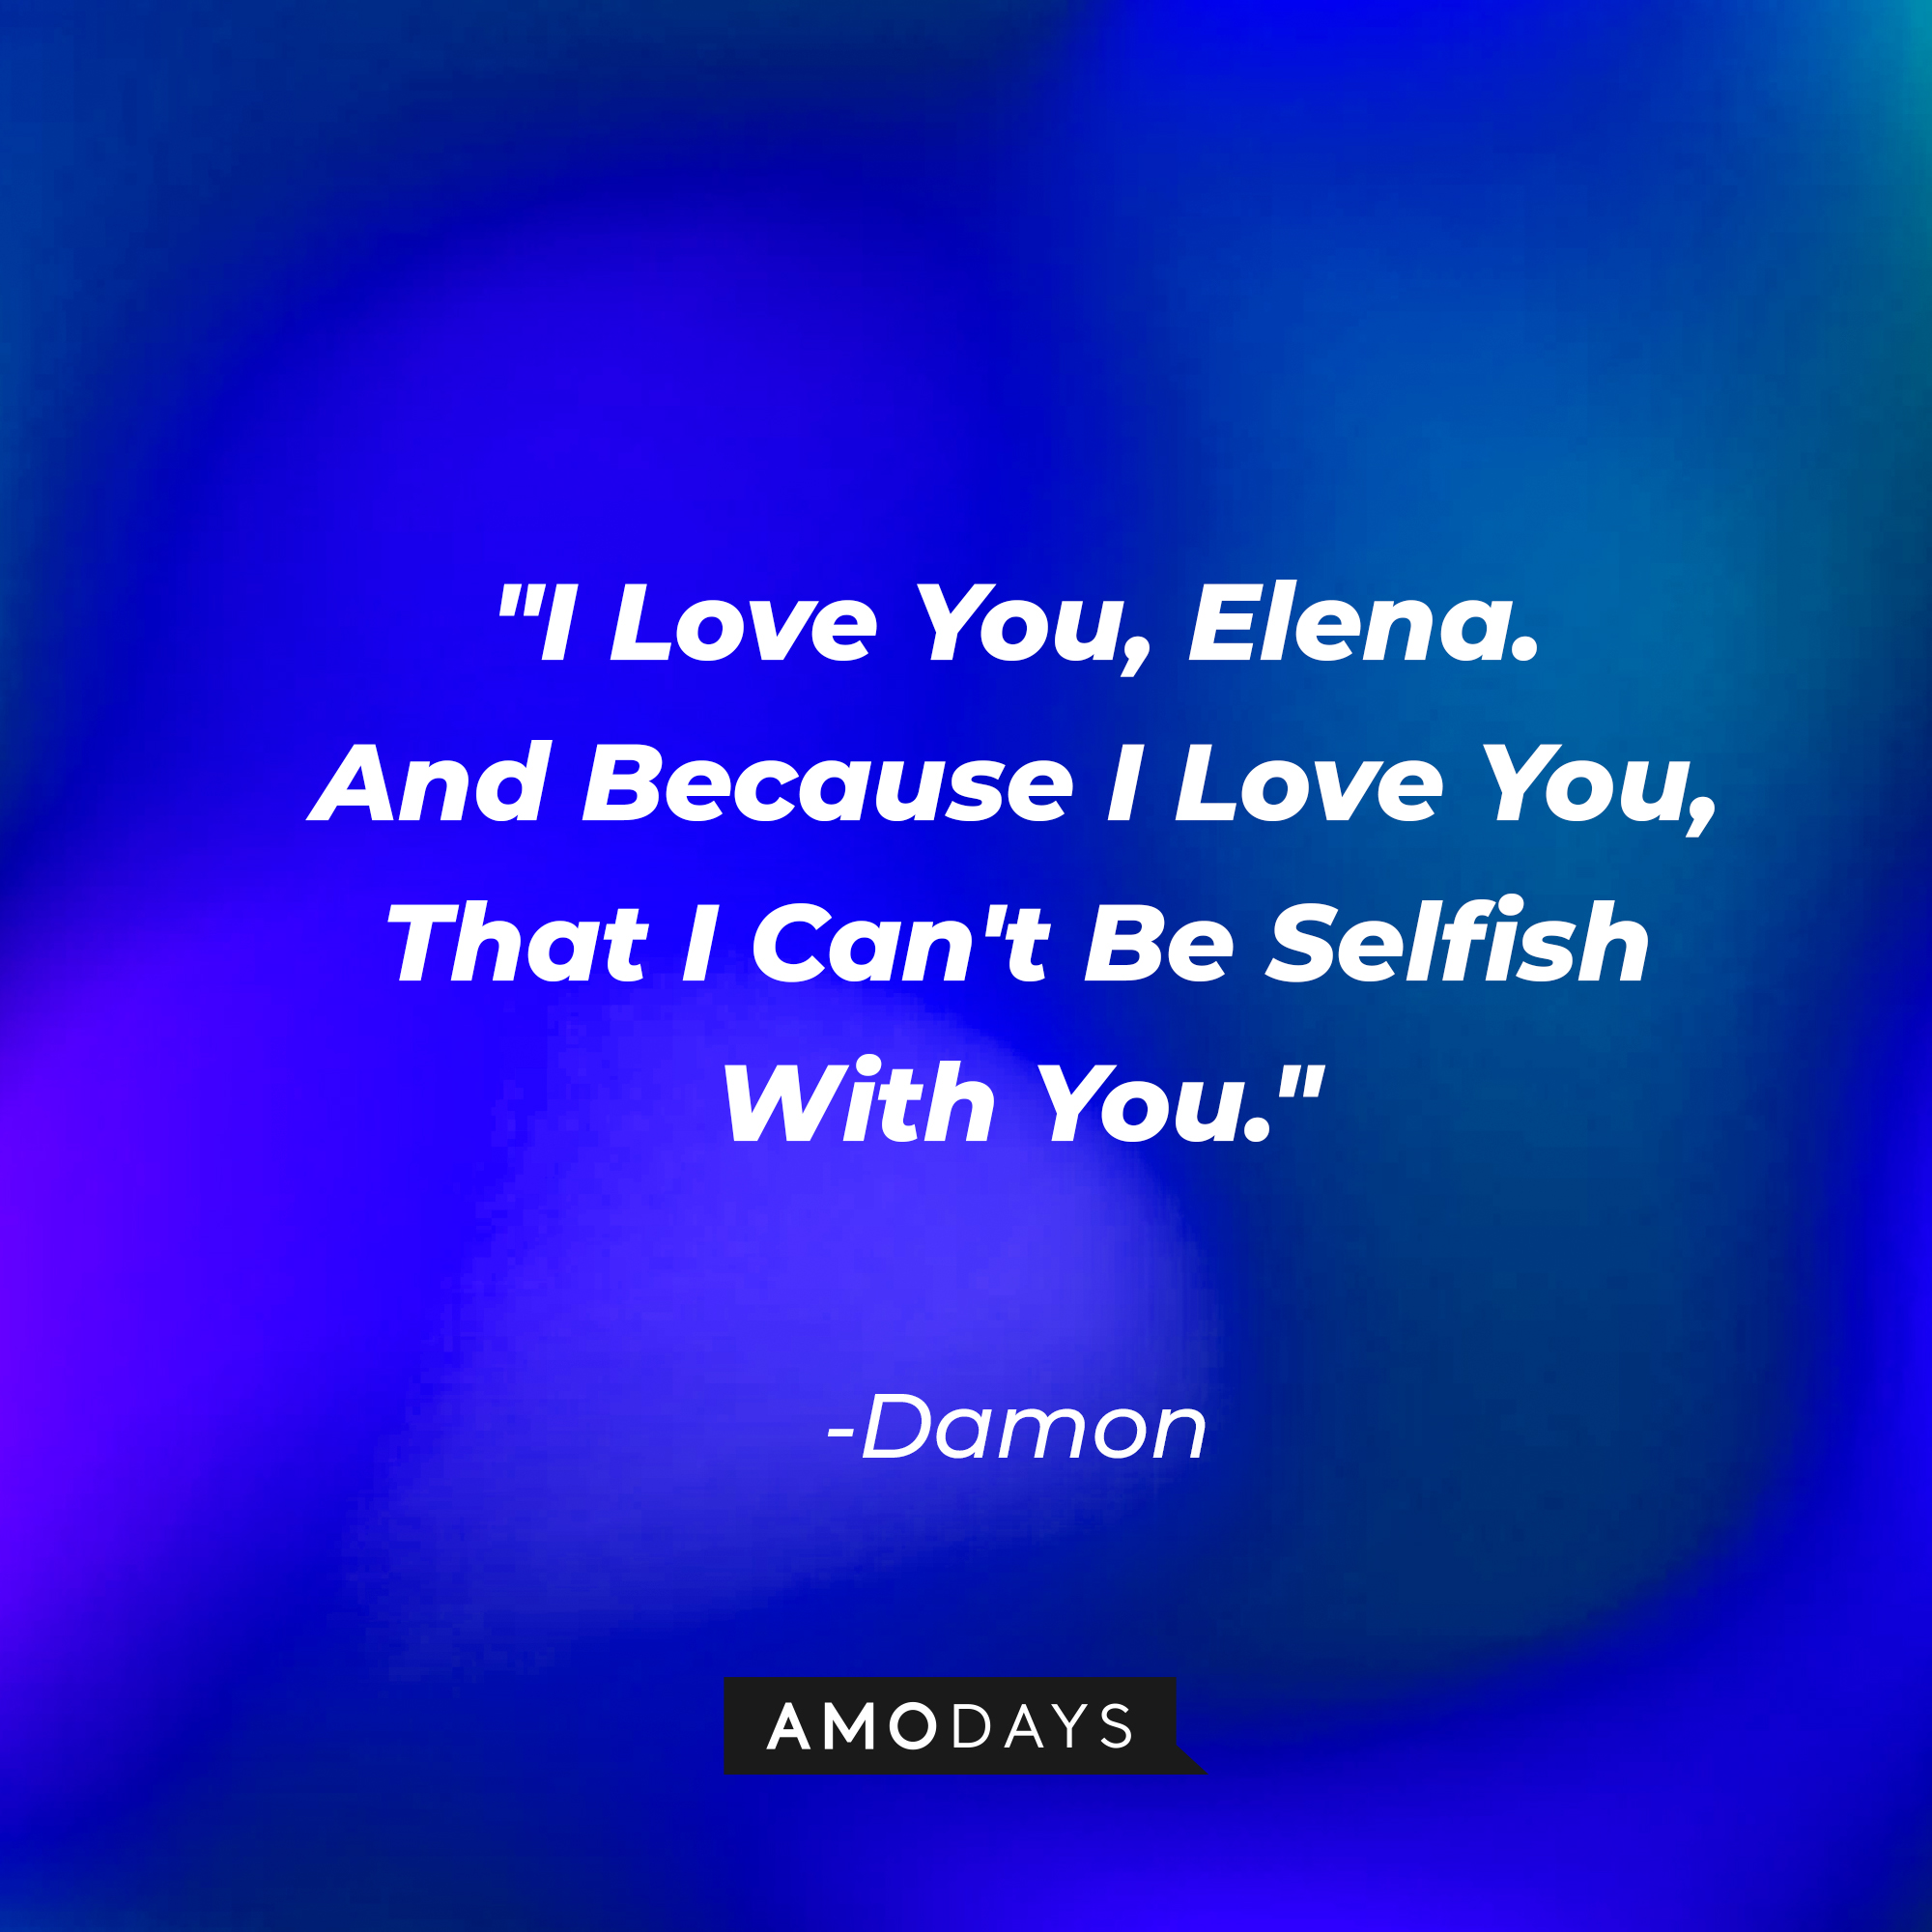 Damon's quote: "I Love You, Elena. And Because I Love You, That I Can't Be Selfish With You." | Source: Amodays